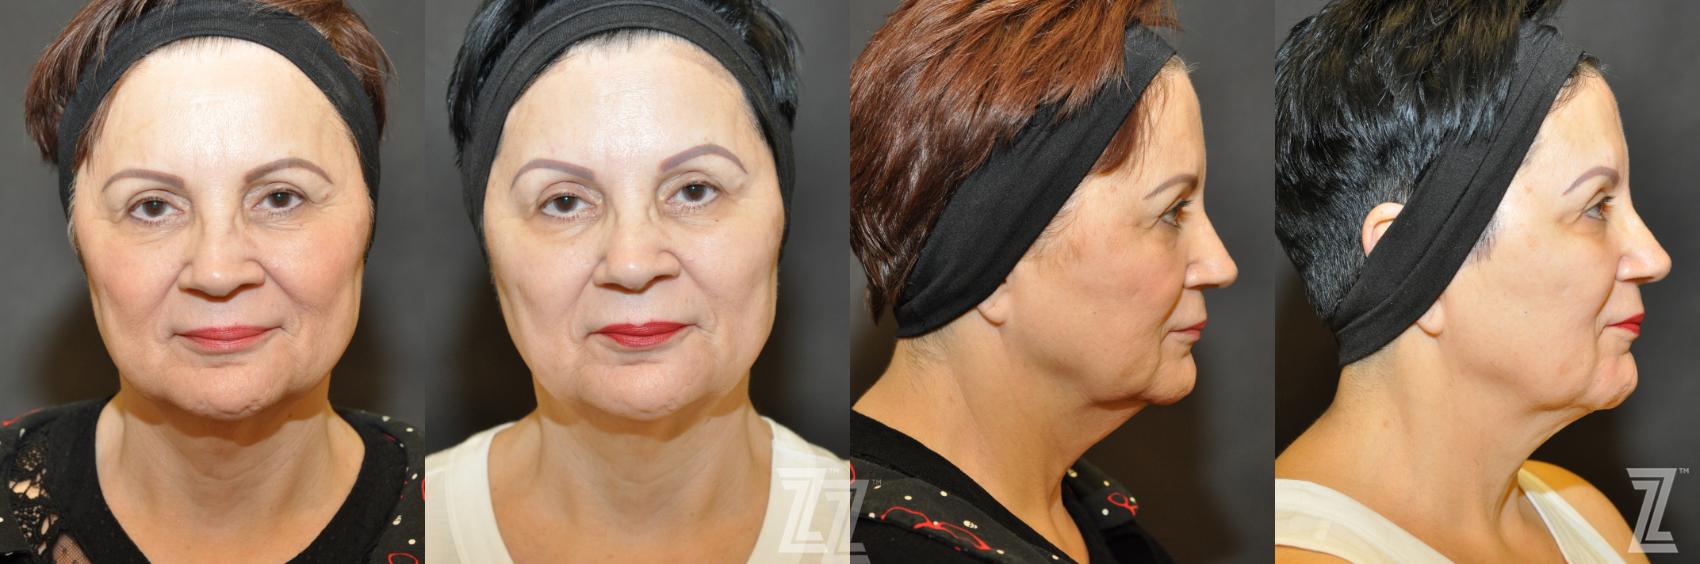 Chemical Peel Before & After Photo | Austin, TX | The Piazza Center for Plastic Surgery & Advanced Skin Care